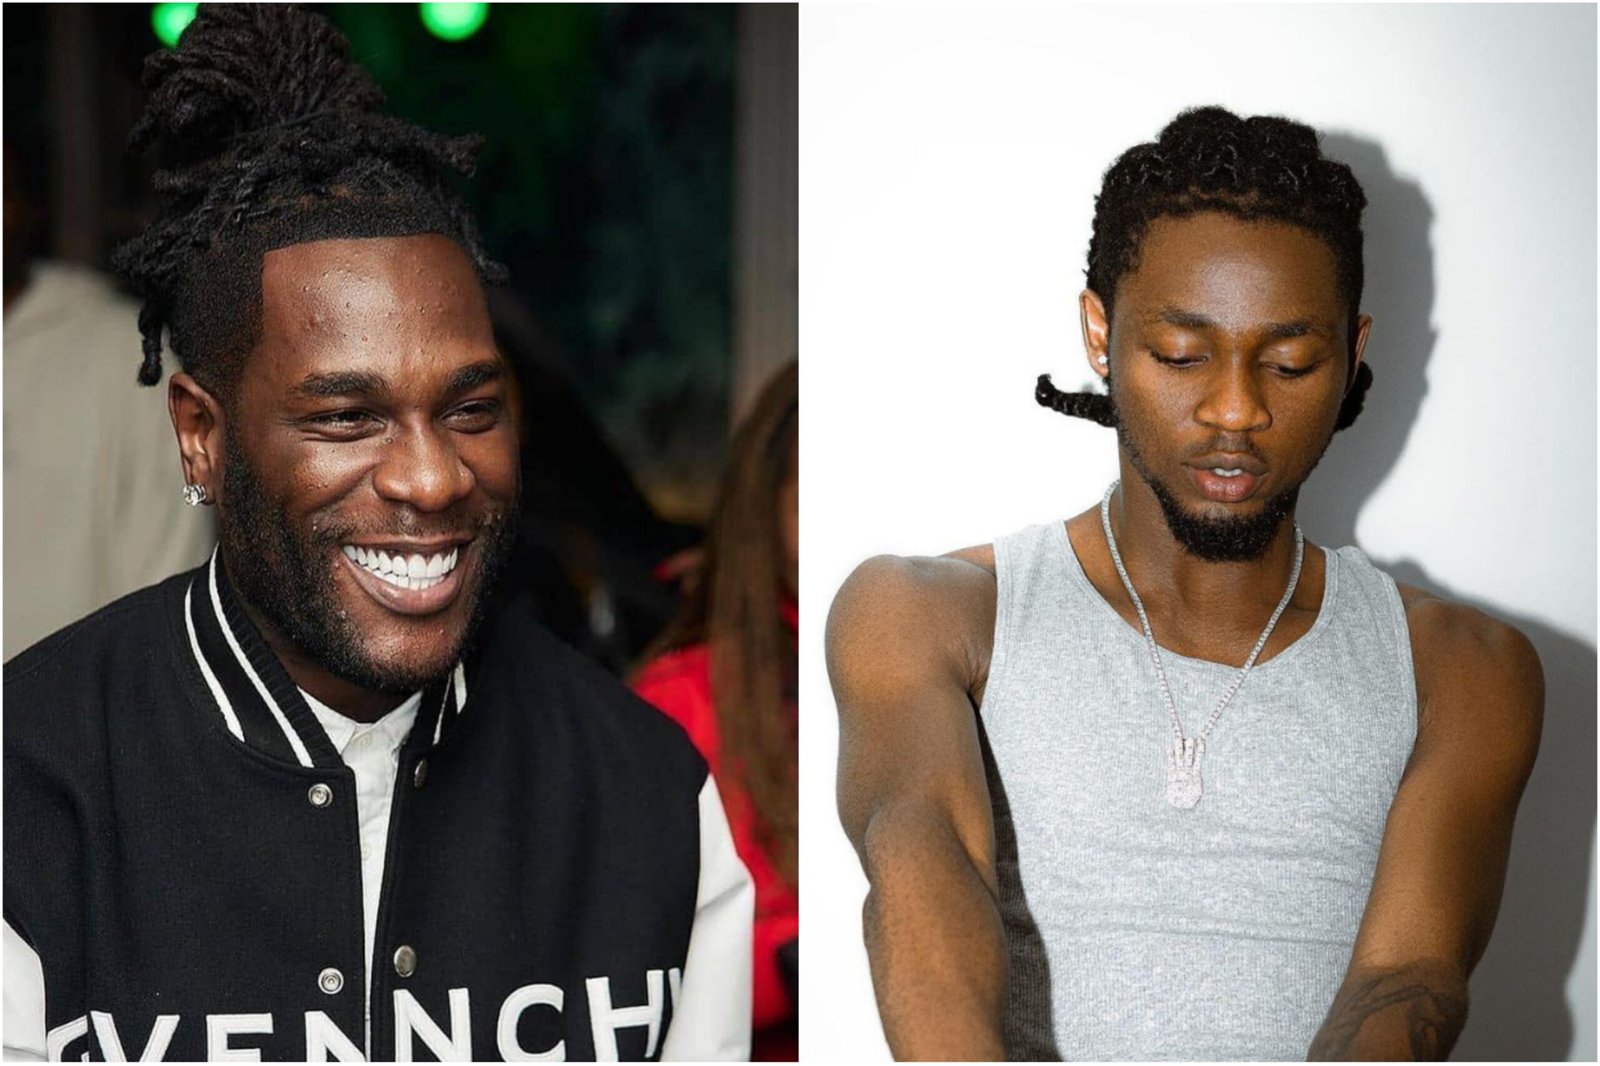 Burna Boy and Omah Lay link up in a studio, Set to drop a song together (watch video)